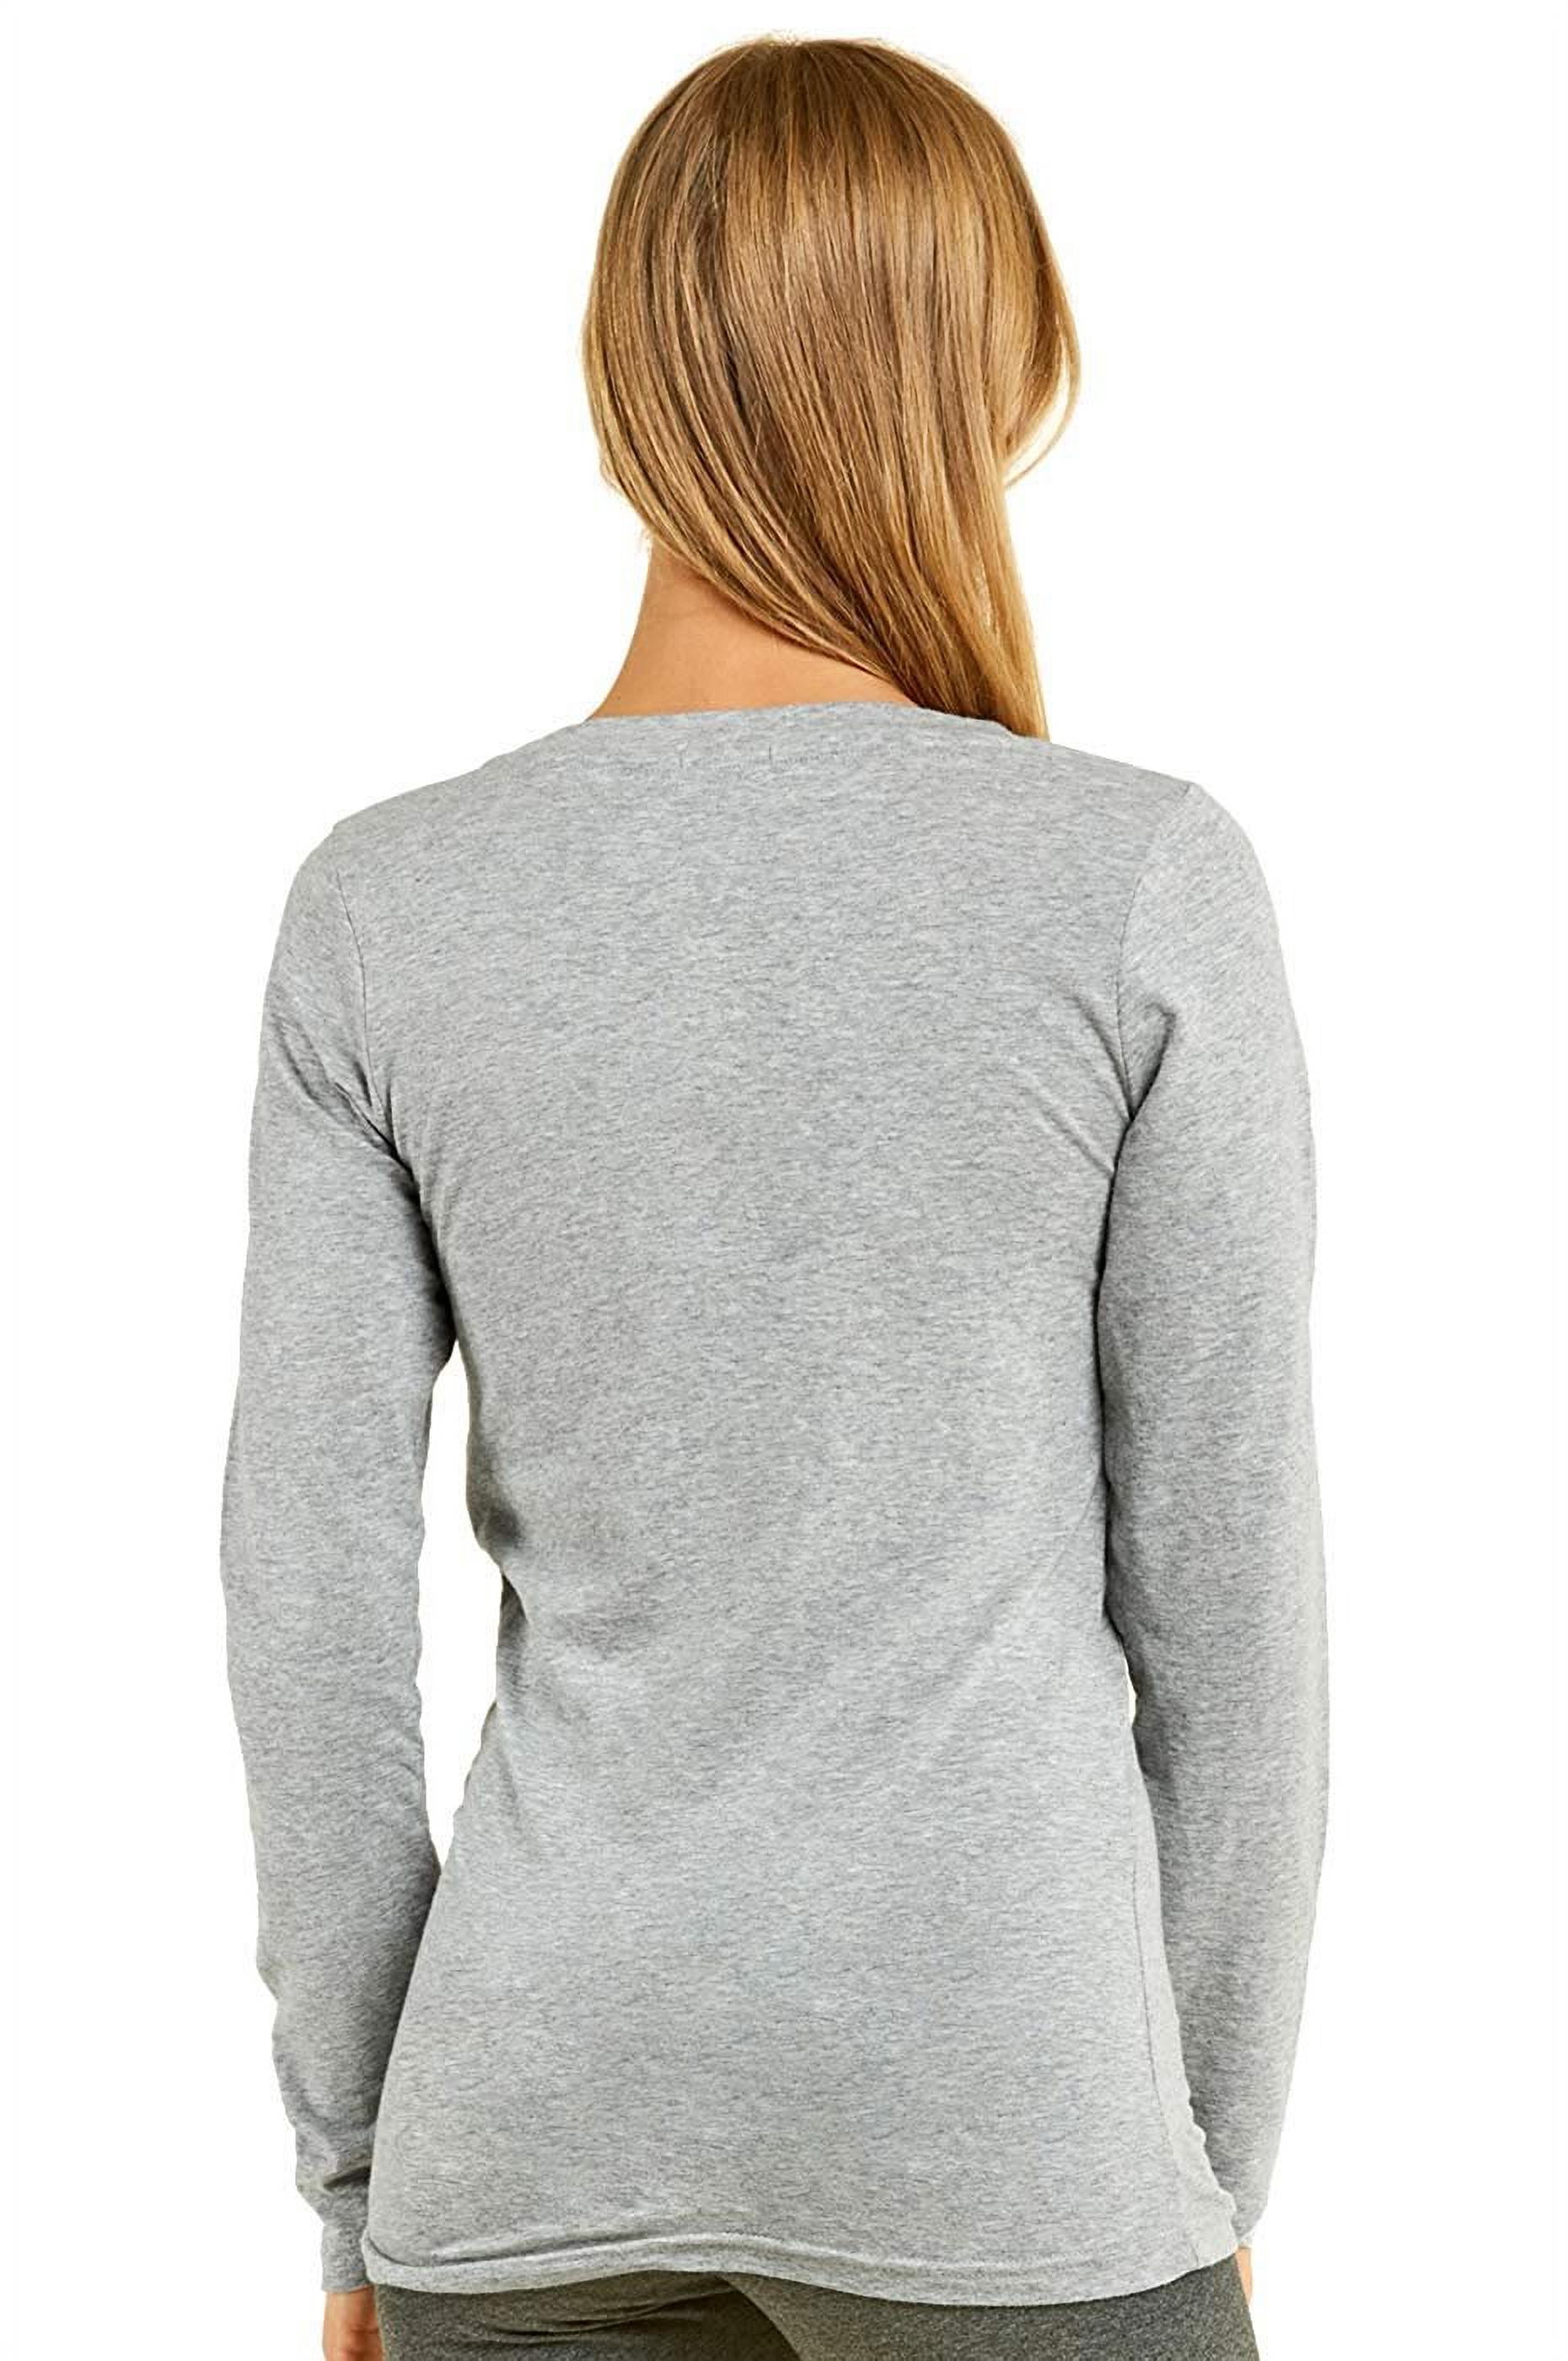 Basic Grey Fitted Scoop Neck T Shirt